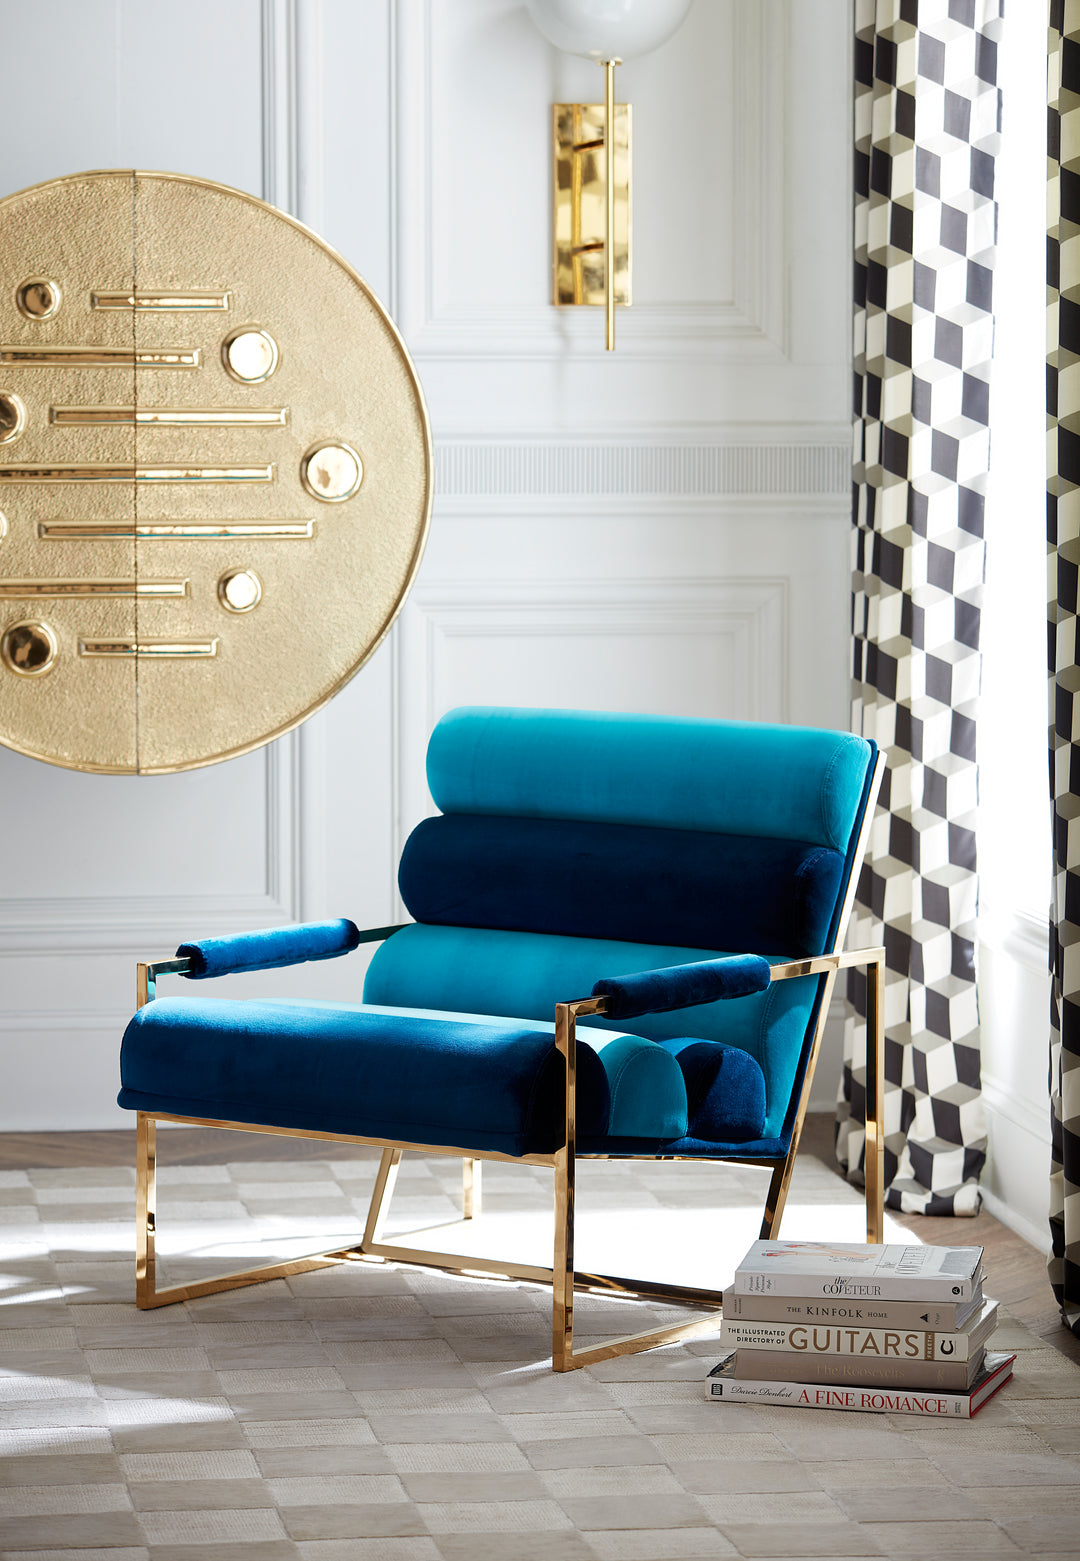 Jonathan Adler Channeled Goldfinger Lounge Chair – Rialto Navy and Turquoise